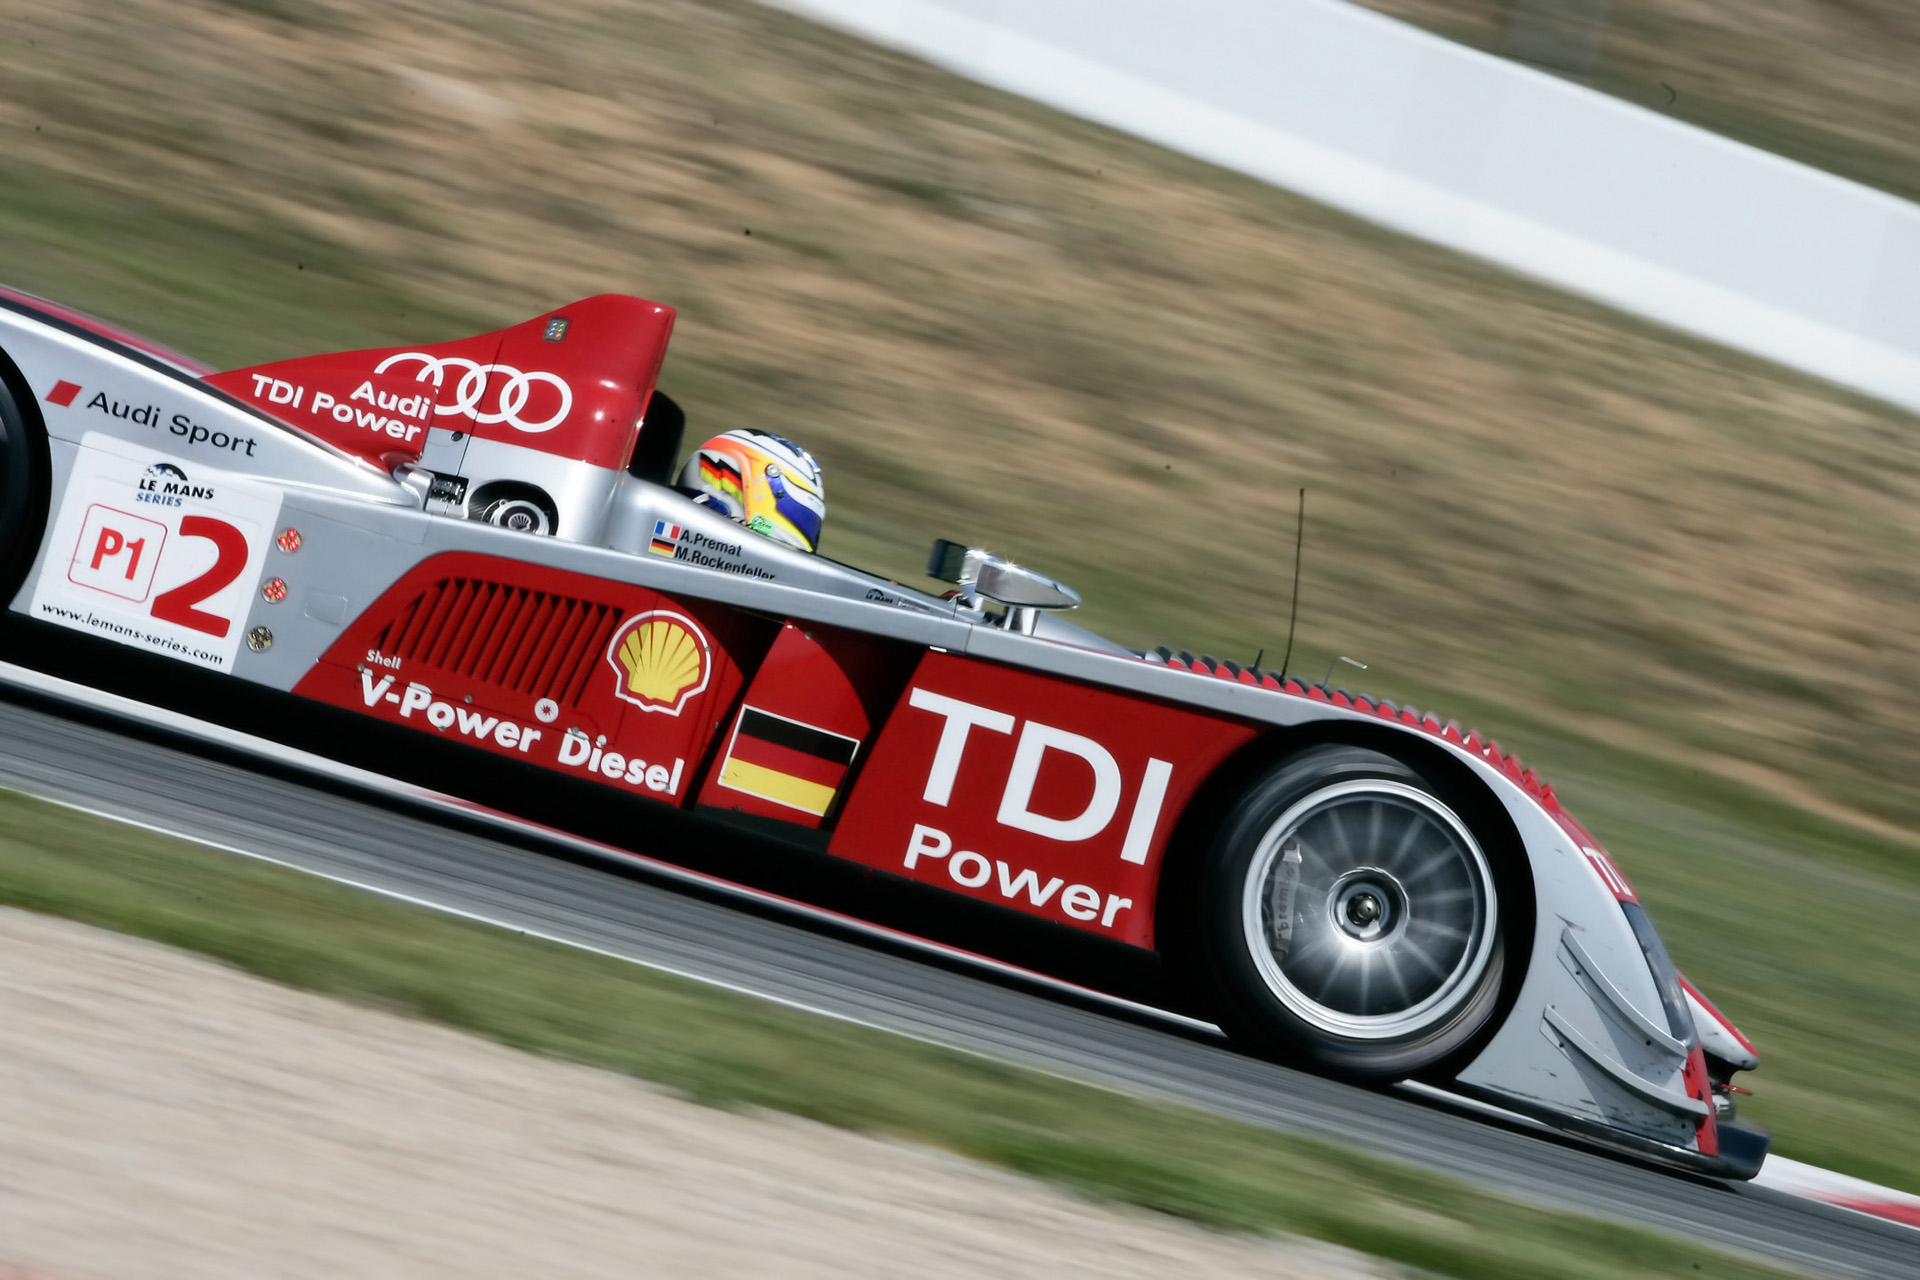 Unrivaled Luxury And Performance: The 2008 Audi R10 TDI